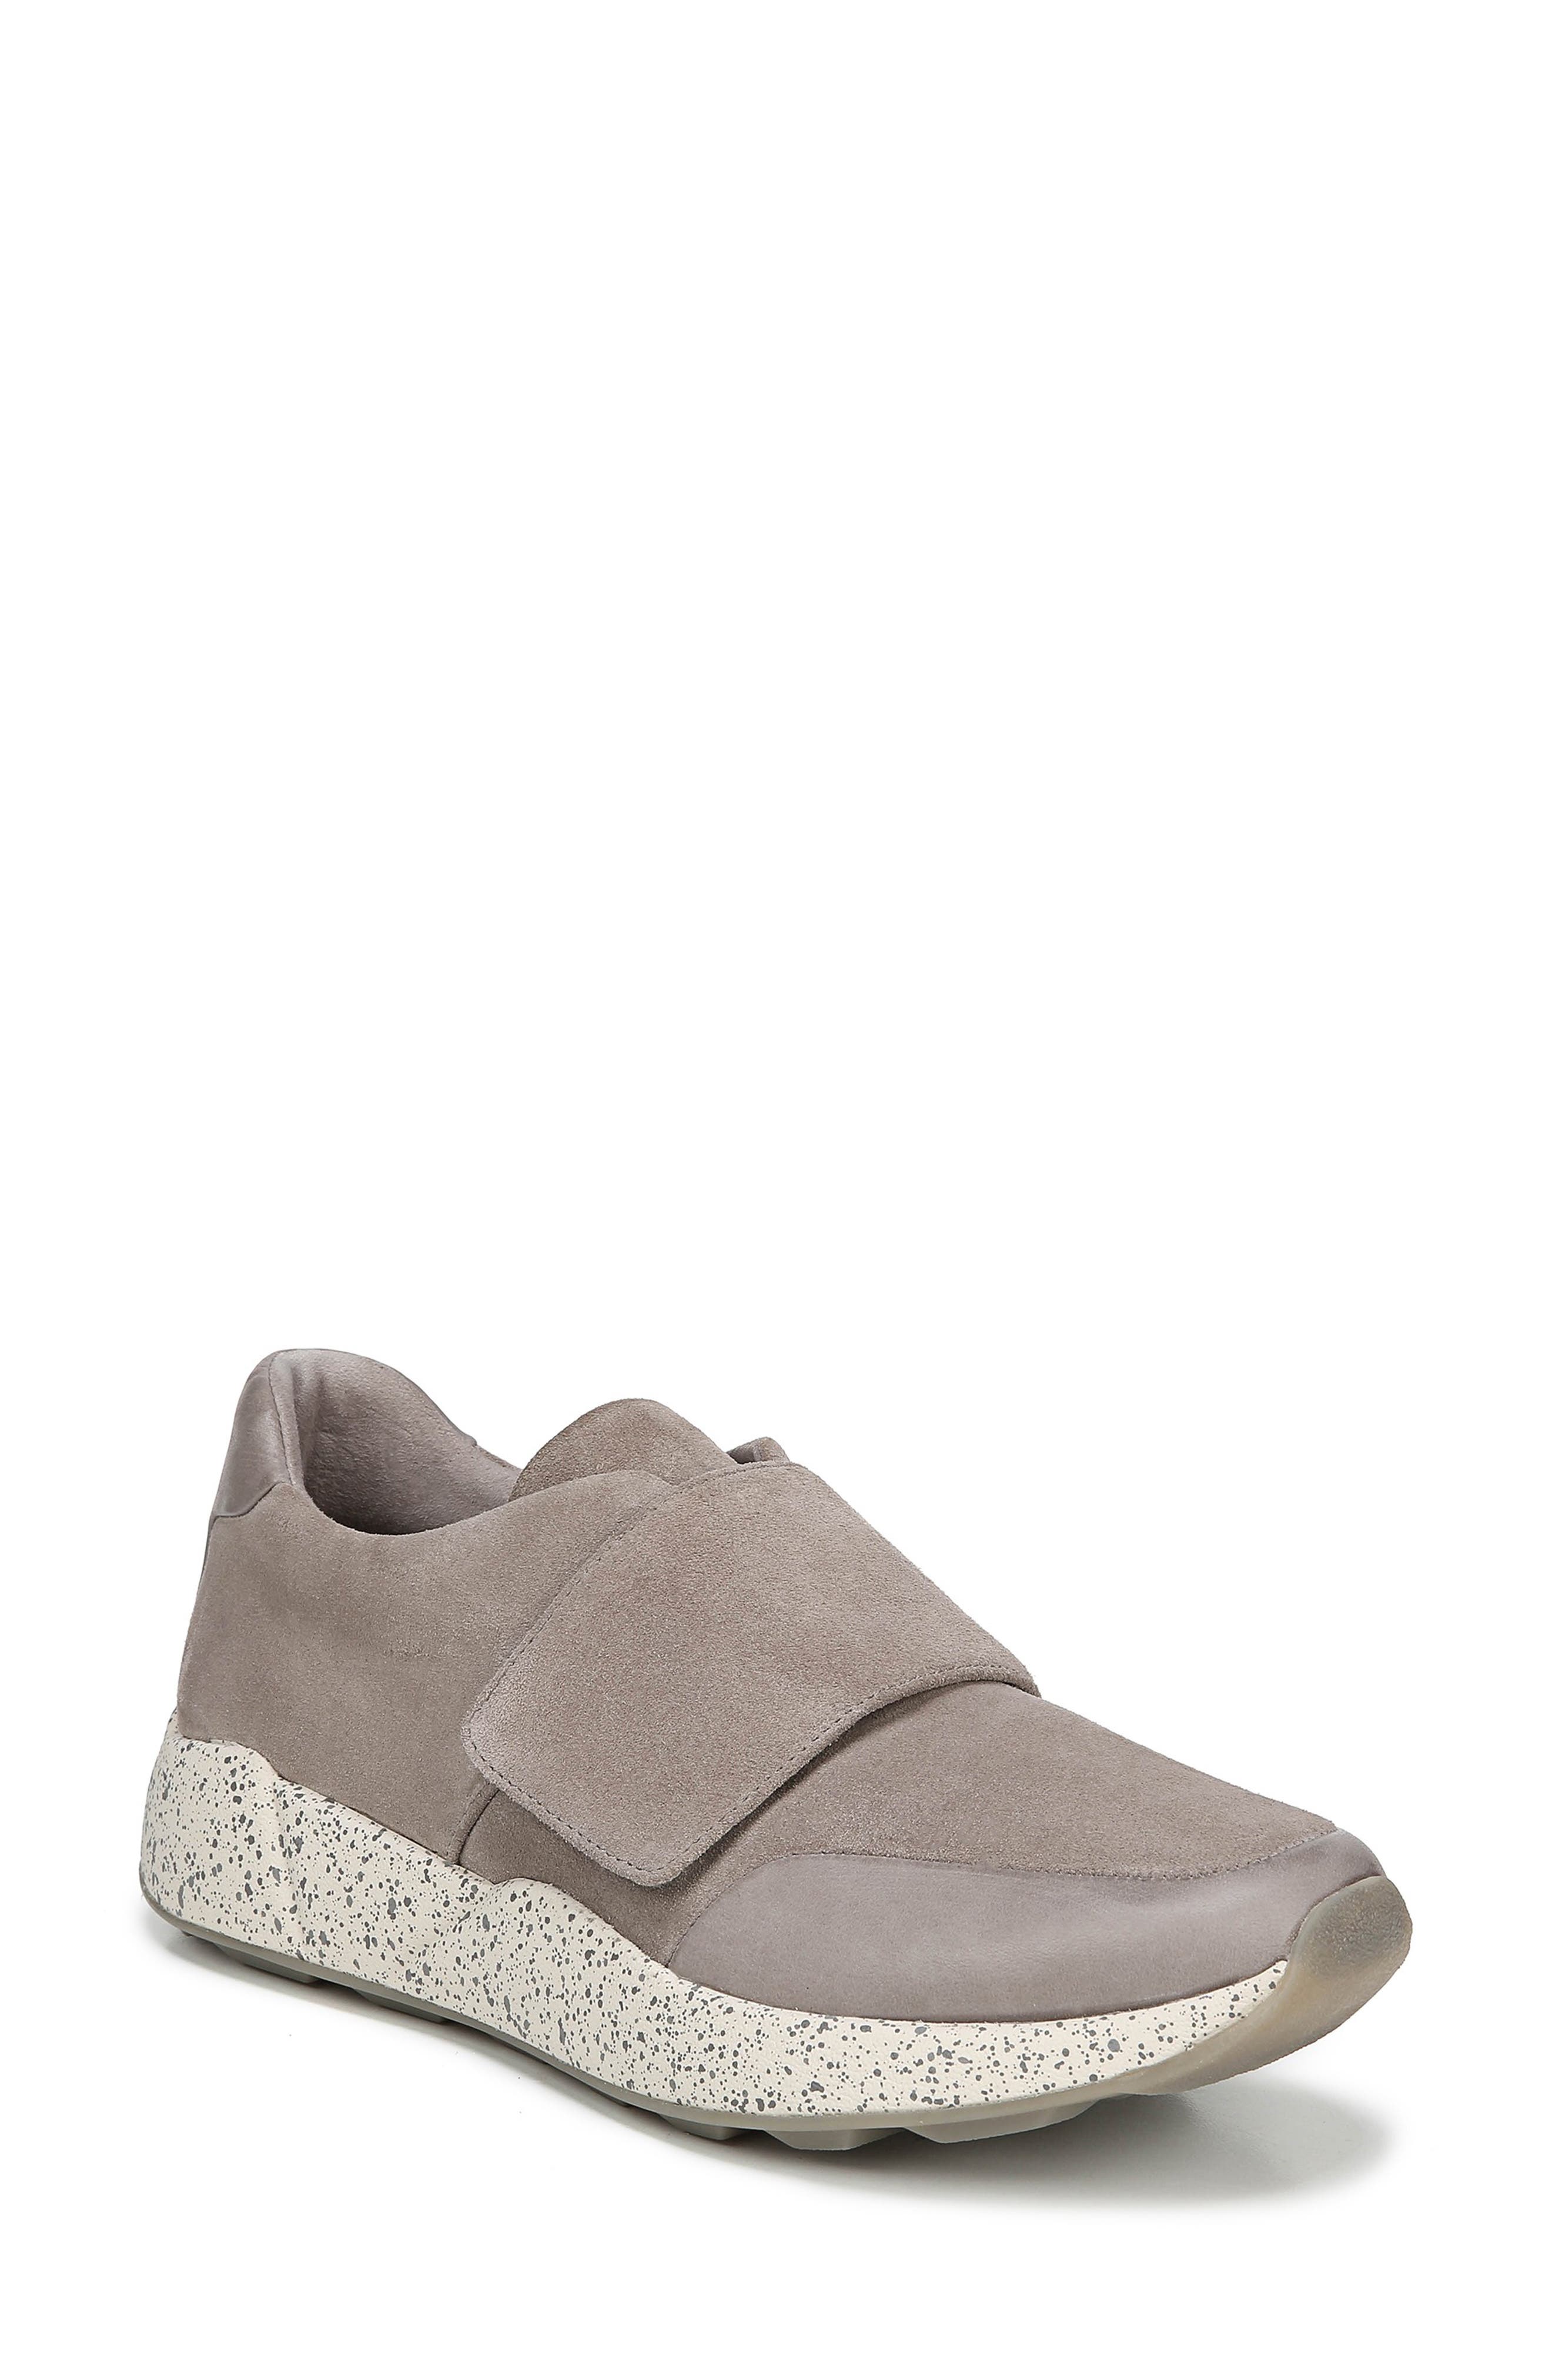 UPC 736709001368 product image for Women's Vince Gage Sneaker, Size 8.5 M - Beige | upcitemdb.com